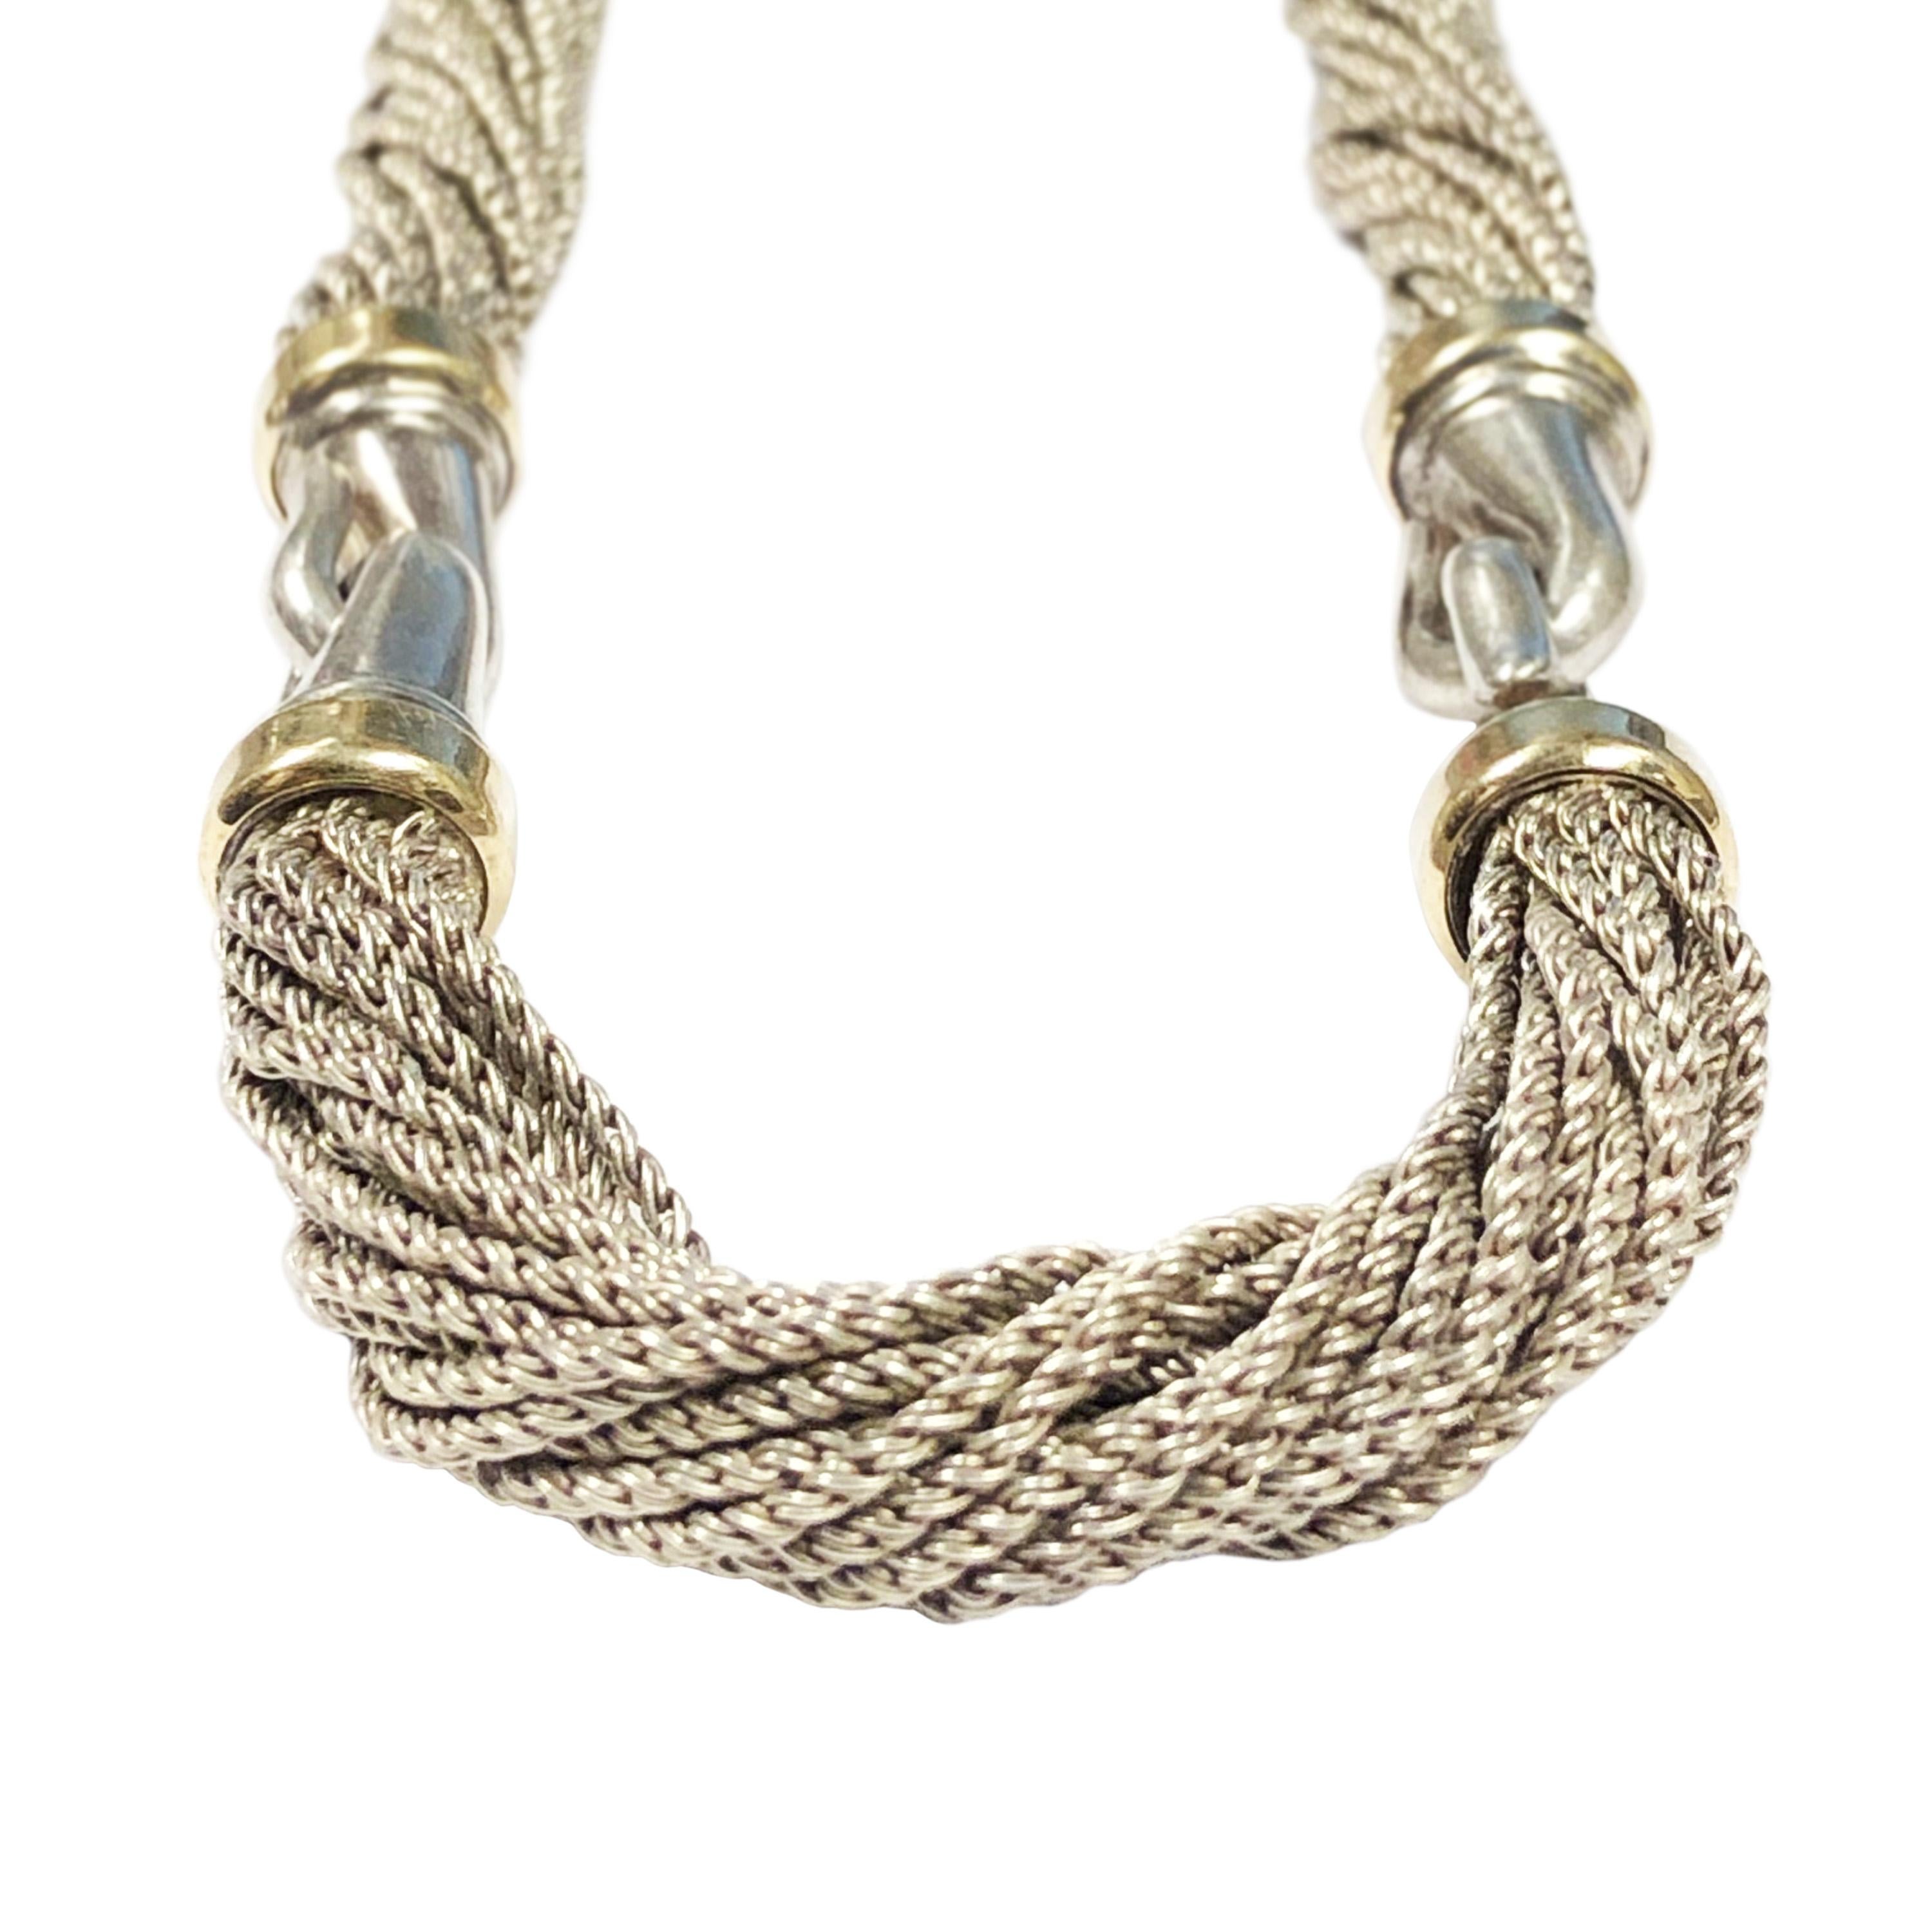 Circa 1980s Tiffany & Company Sterling Silver and 18K Yellow Gold Torsade Necklace. Measuring 16 1/4 inches in length and 3/8 inch wide. Comprised of 3 sections of soft woven multiple chain connected by stations of solid silver and 18K yellow Gold.